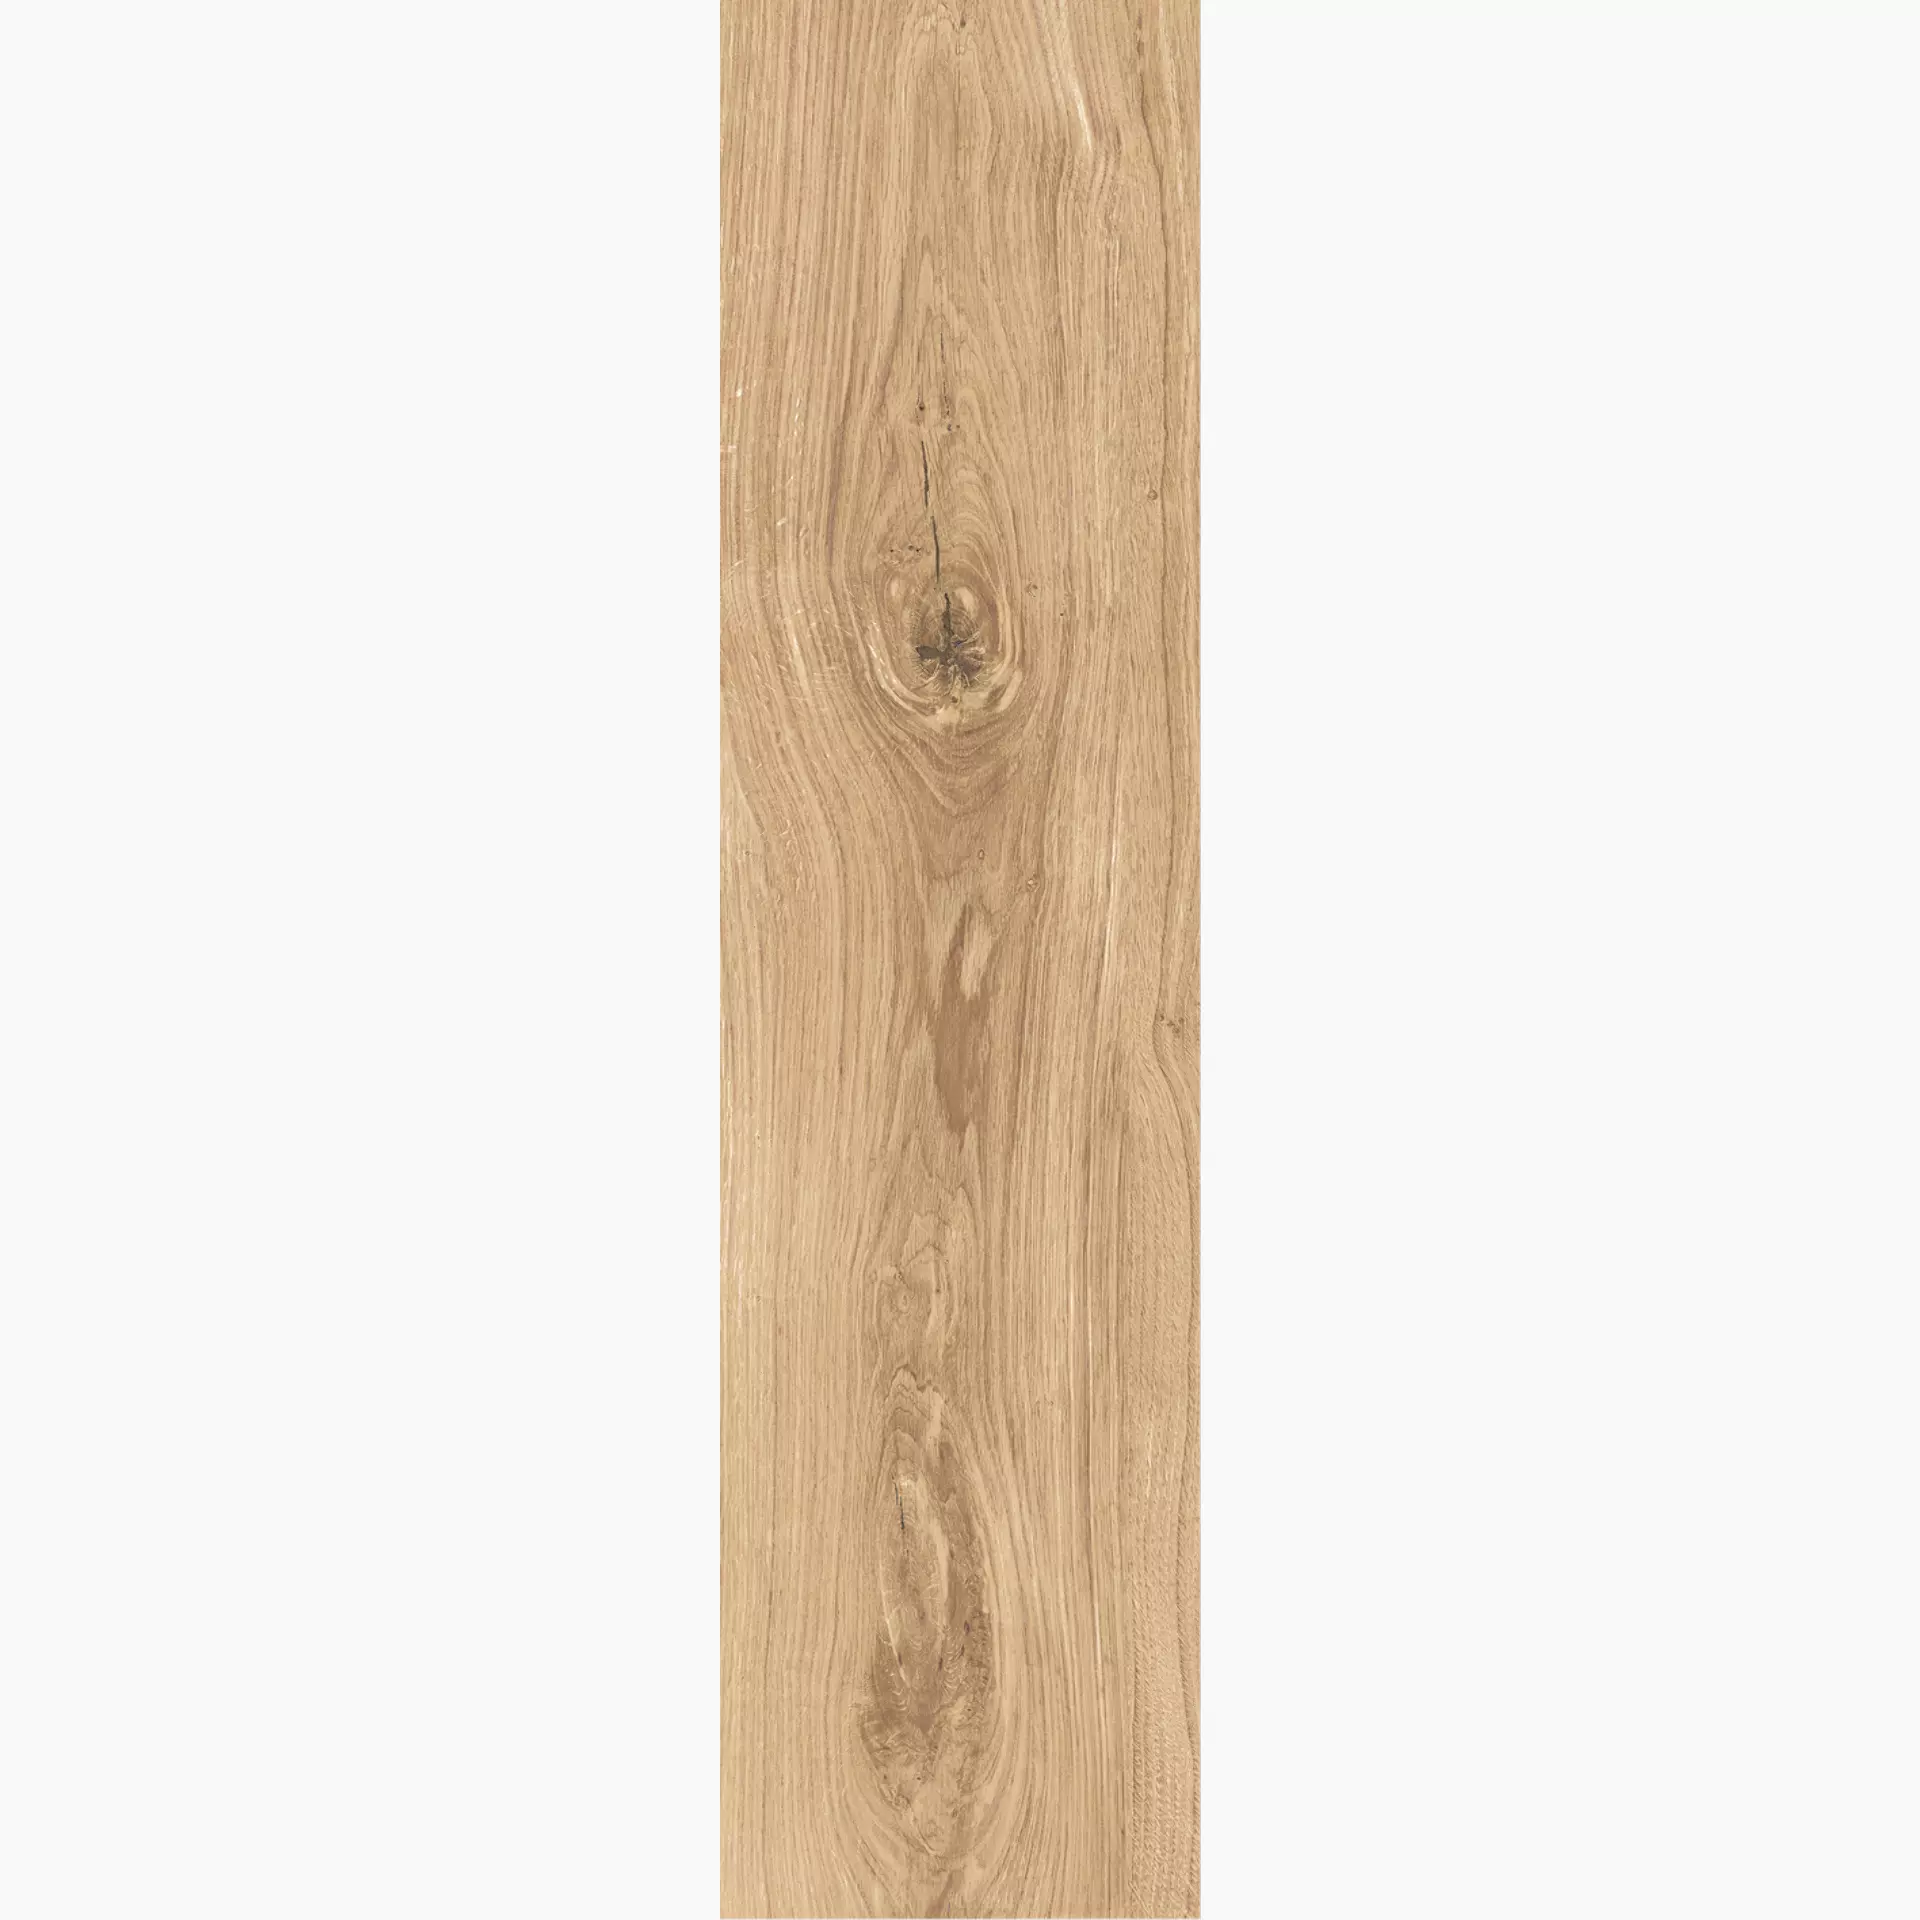 Novabell Artwood Honey Naturale AWD43RT 30x120cm rectified 9mm